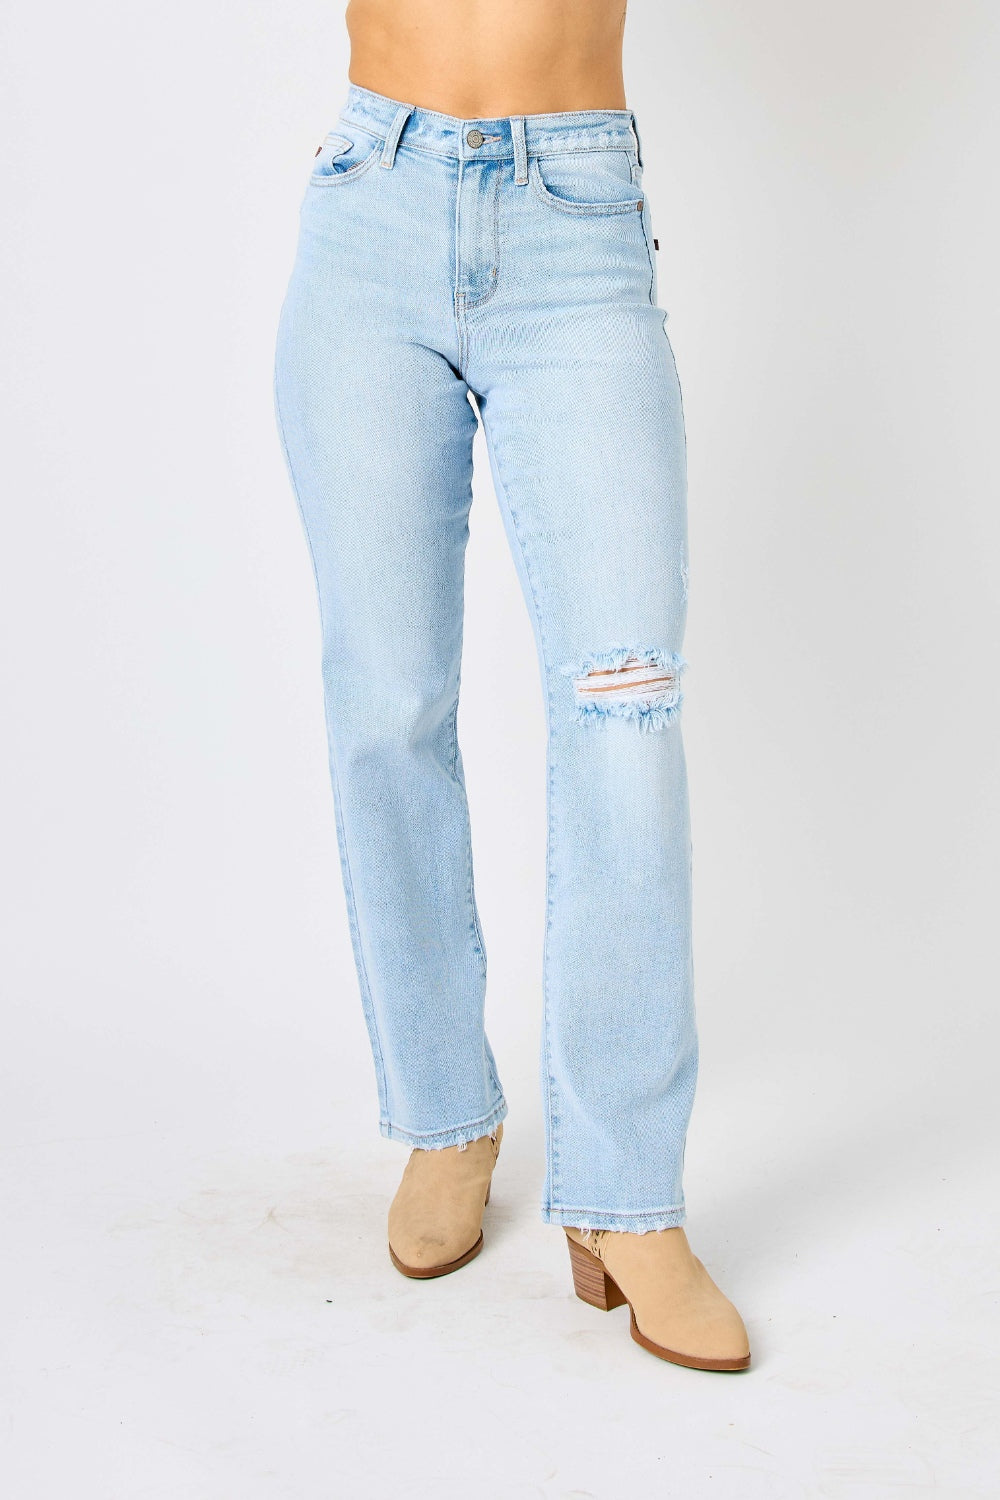 Judy Blue Full Size High Waist Distressed Straight Jeans pants Krazy Heart Designs Boutique Light 0(24) 